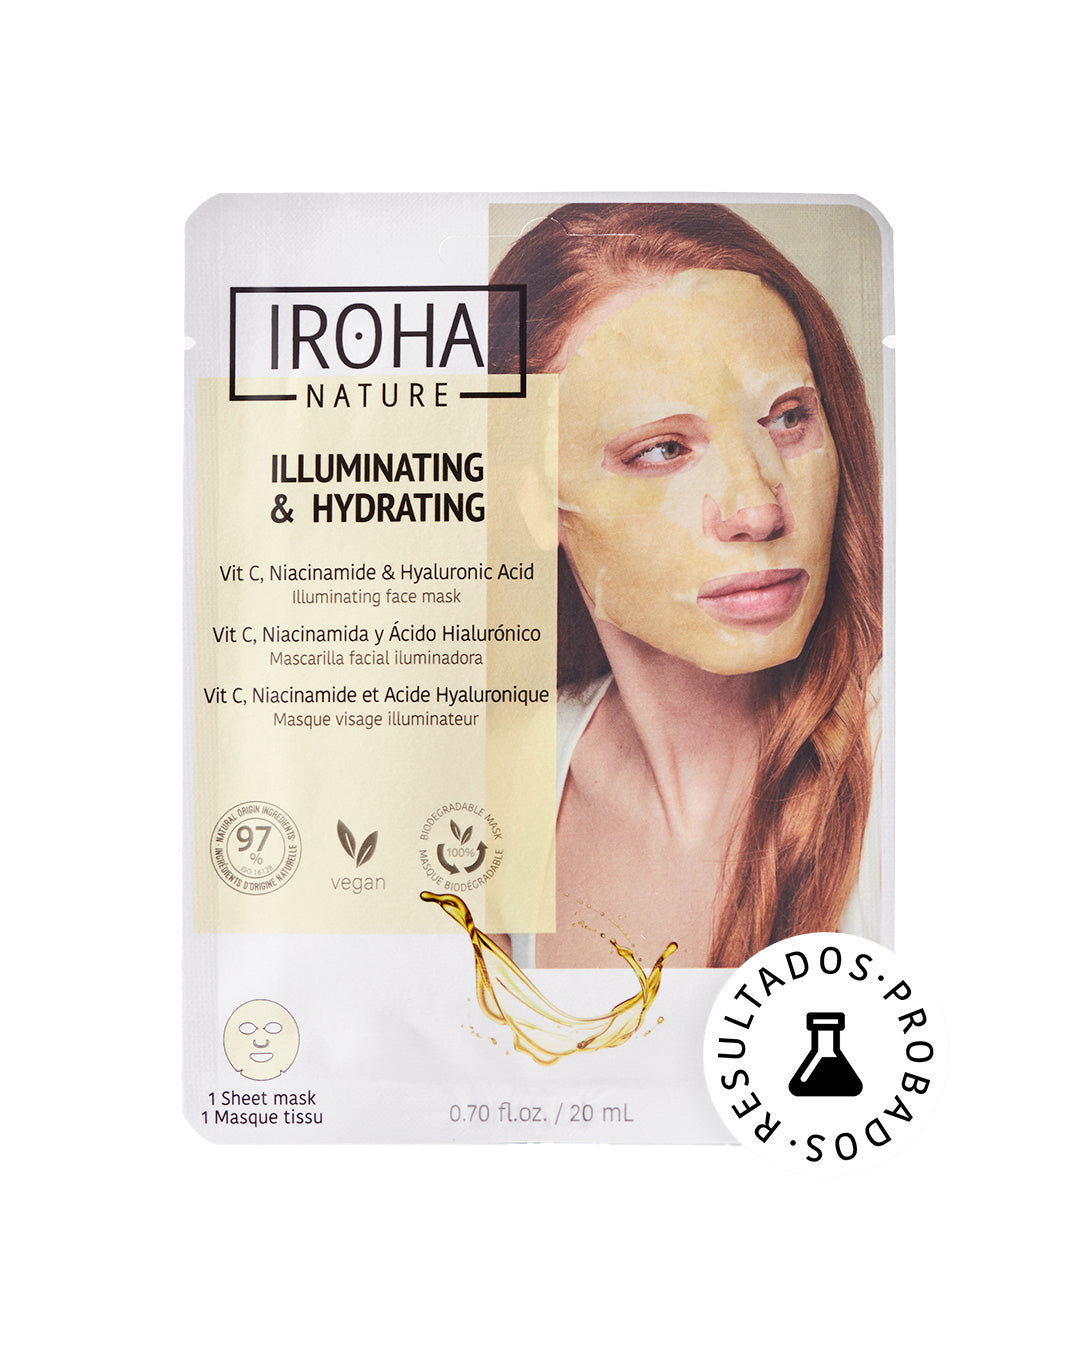 

Iroha Nature Disposable Illuminating and Moisturizing Face Mask in Fabric with Vitamin C, Niacinamide, and Hyaluronic Acid 1 piece x 20 ml